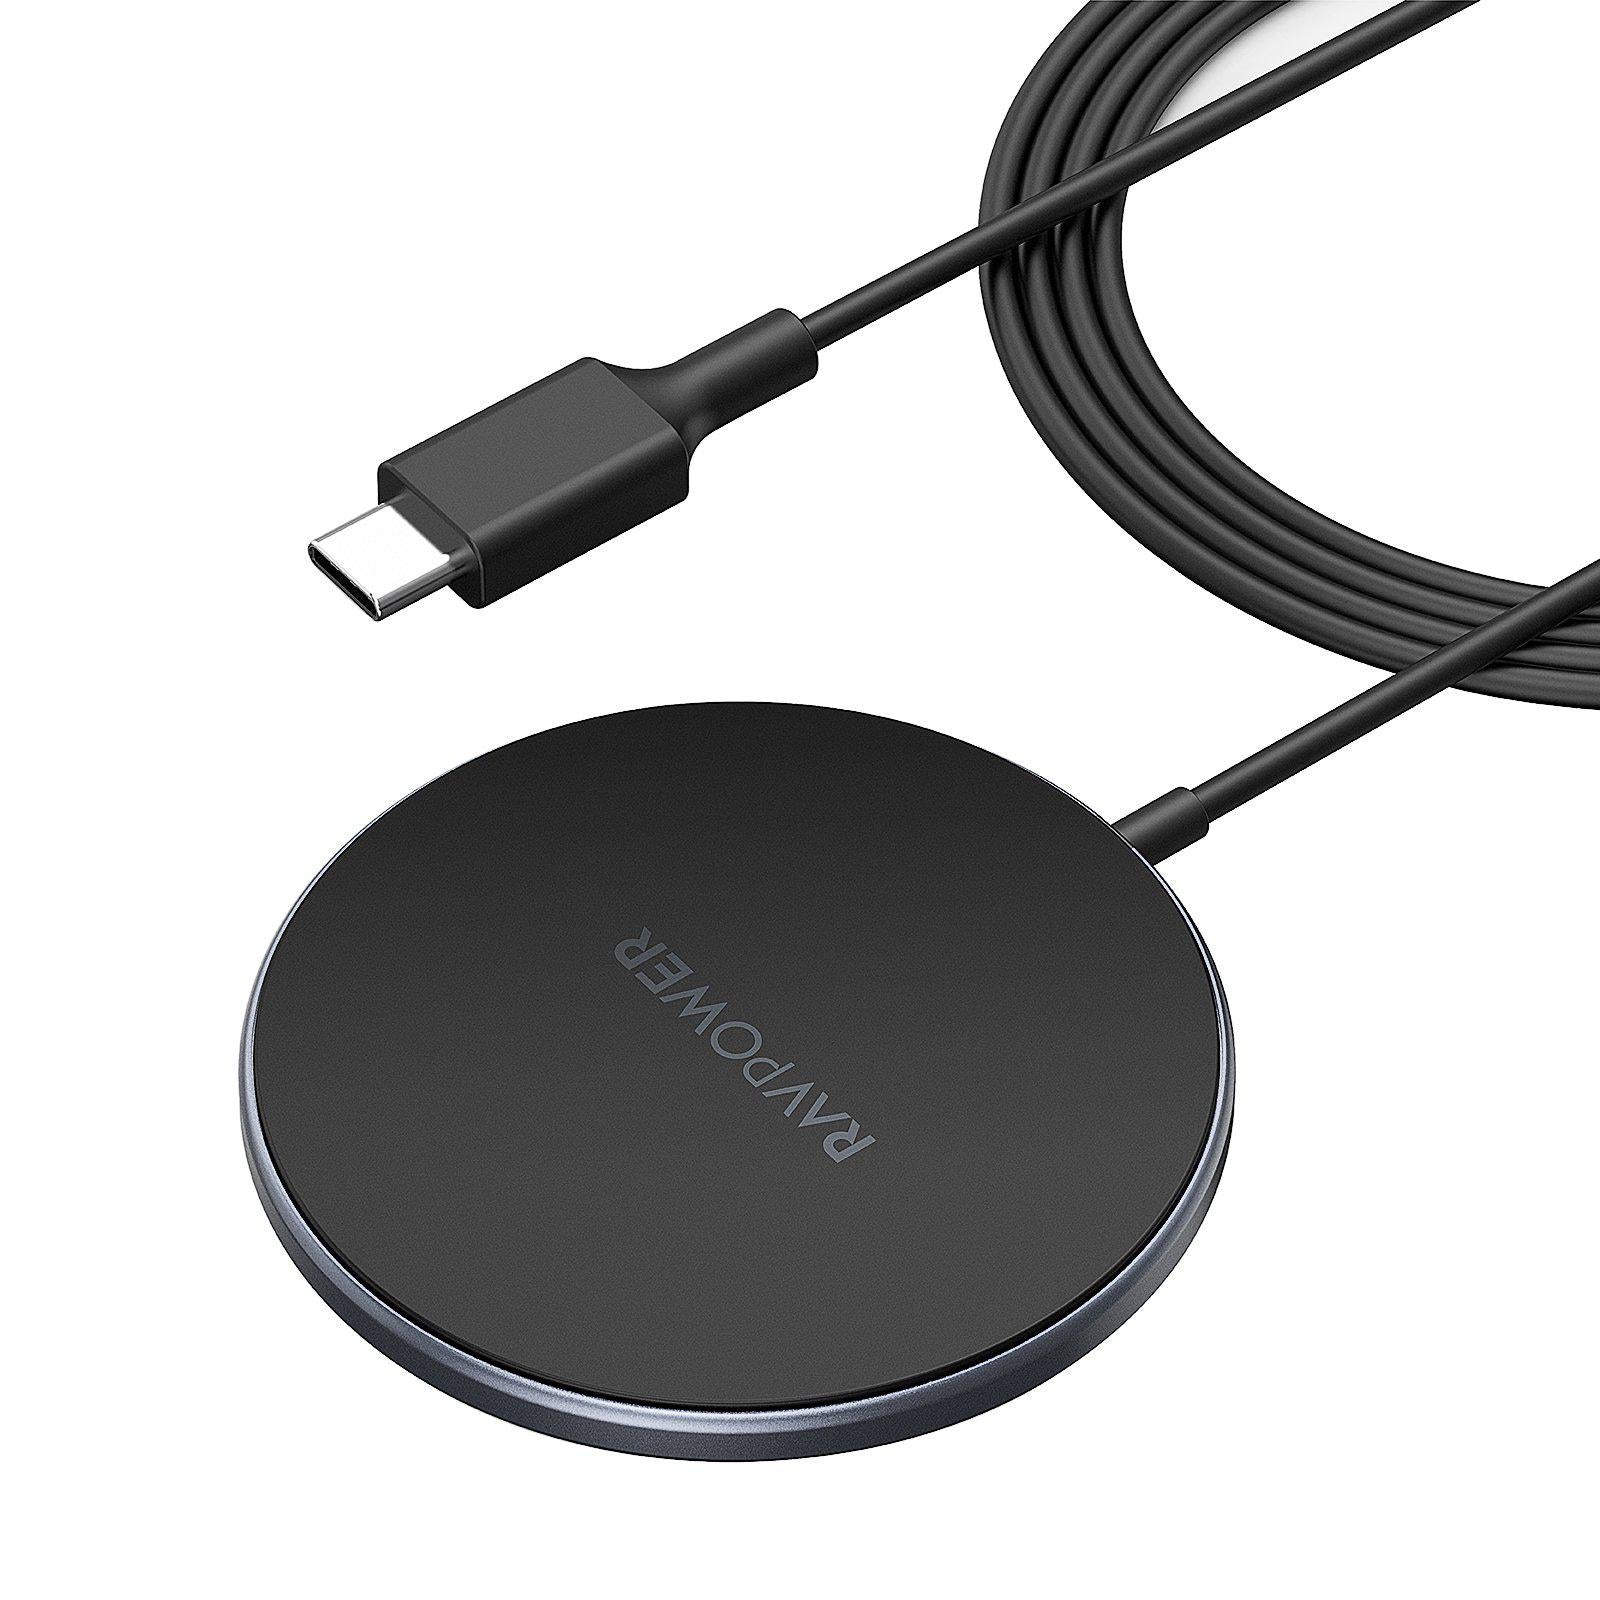 Magnetic Wireless Charger for iPhone 12, Wireless Charging Pad with 5f